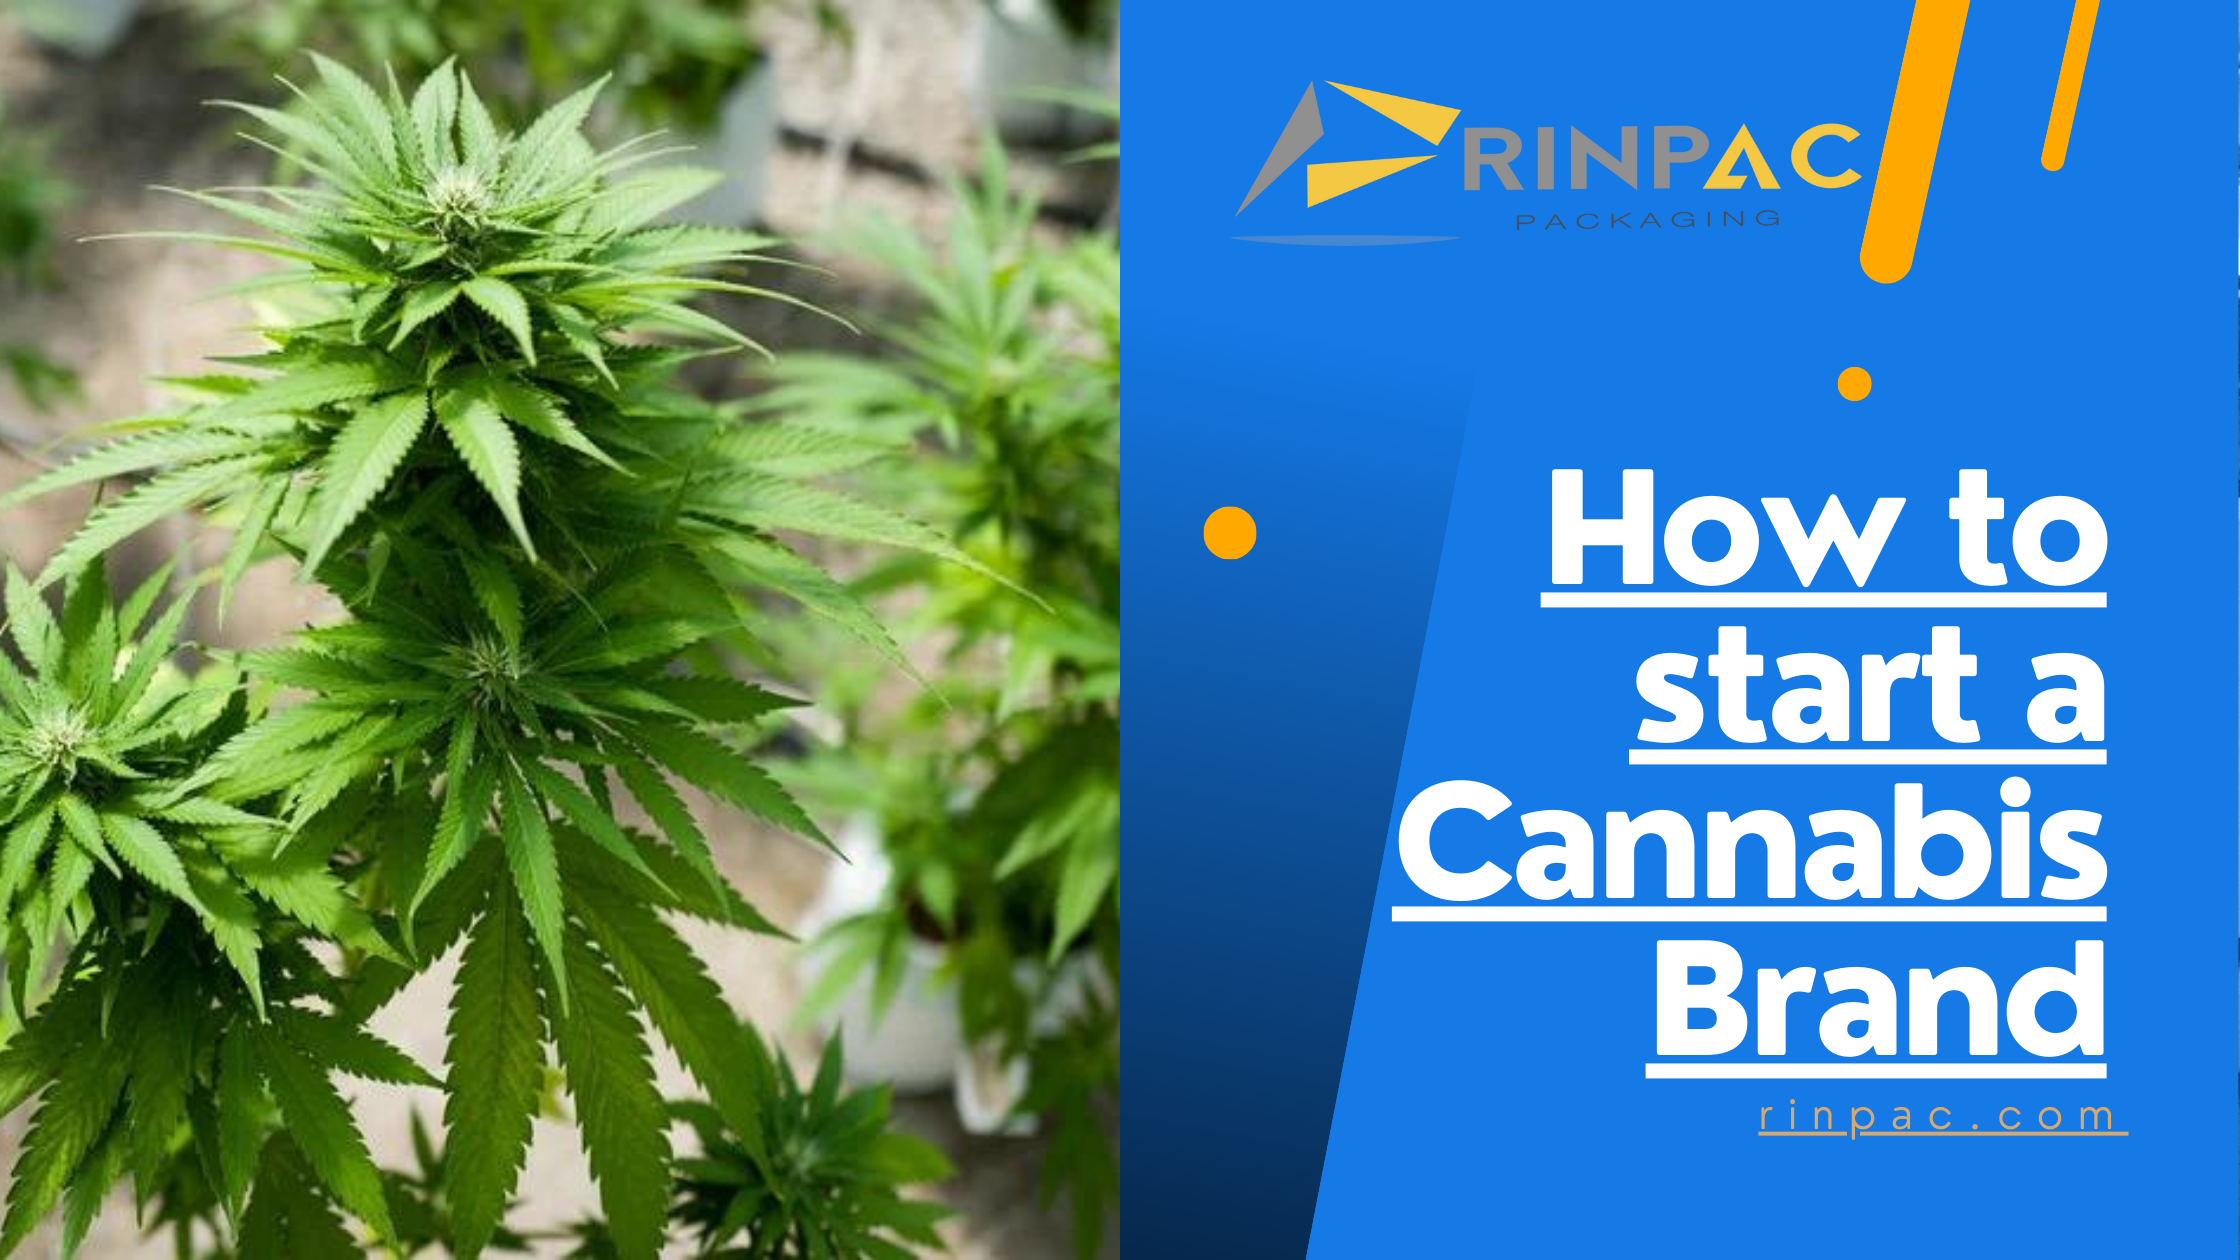 How to start a Cannabis Brand